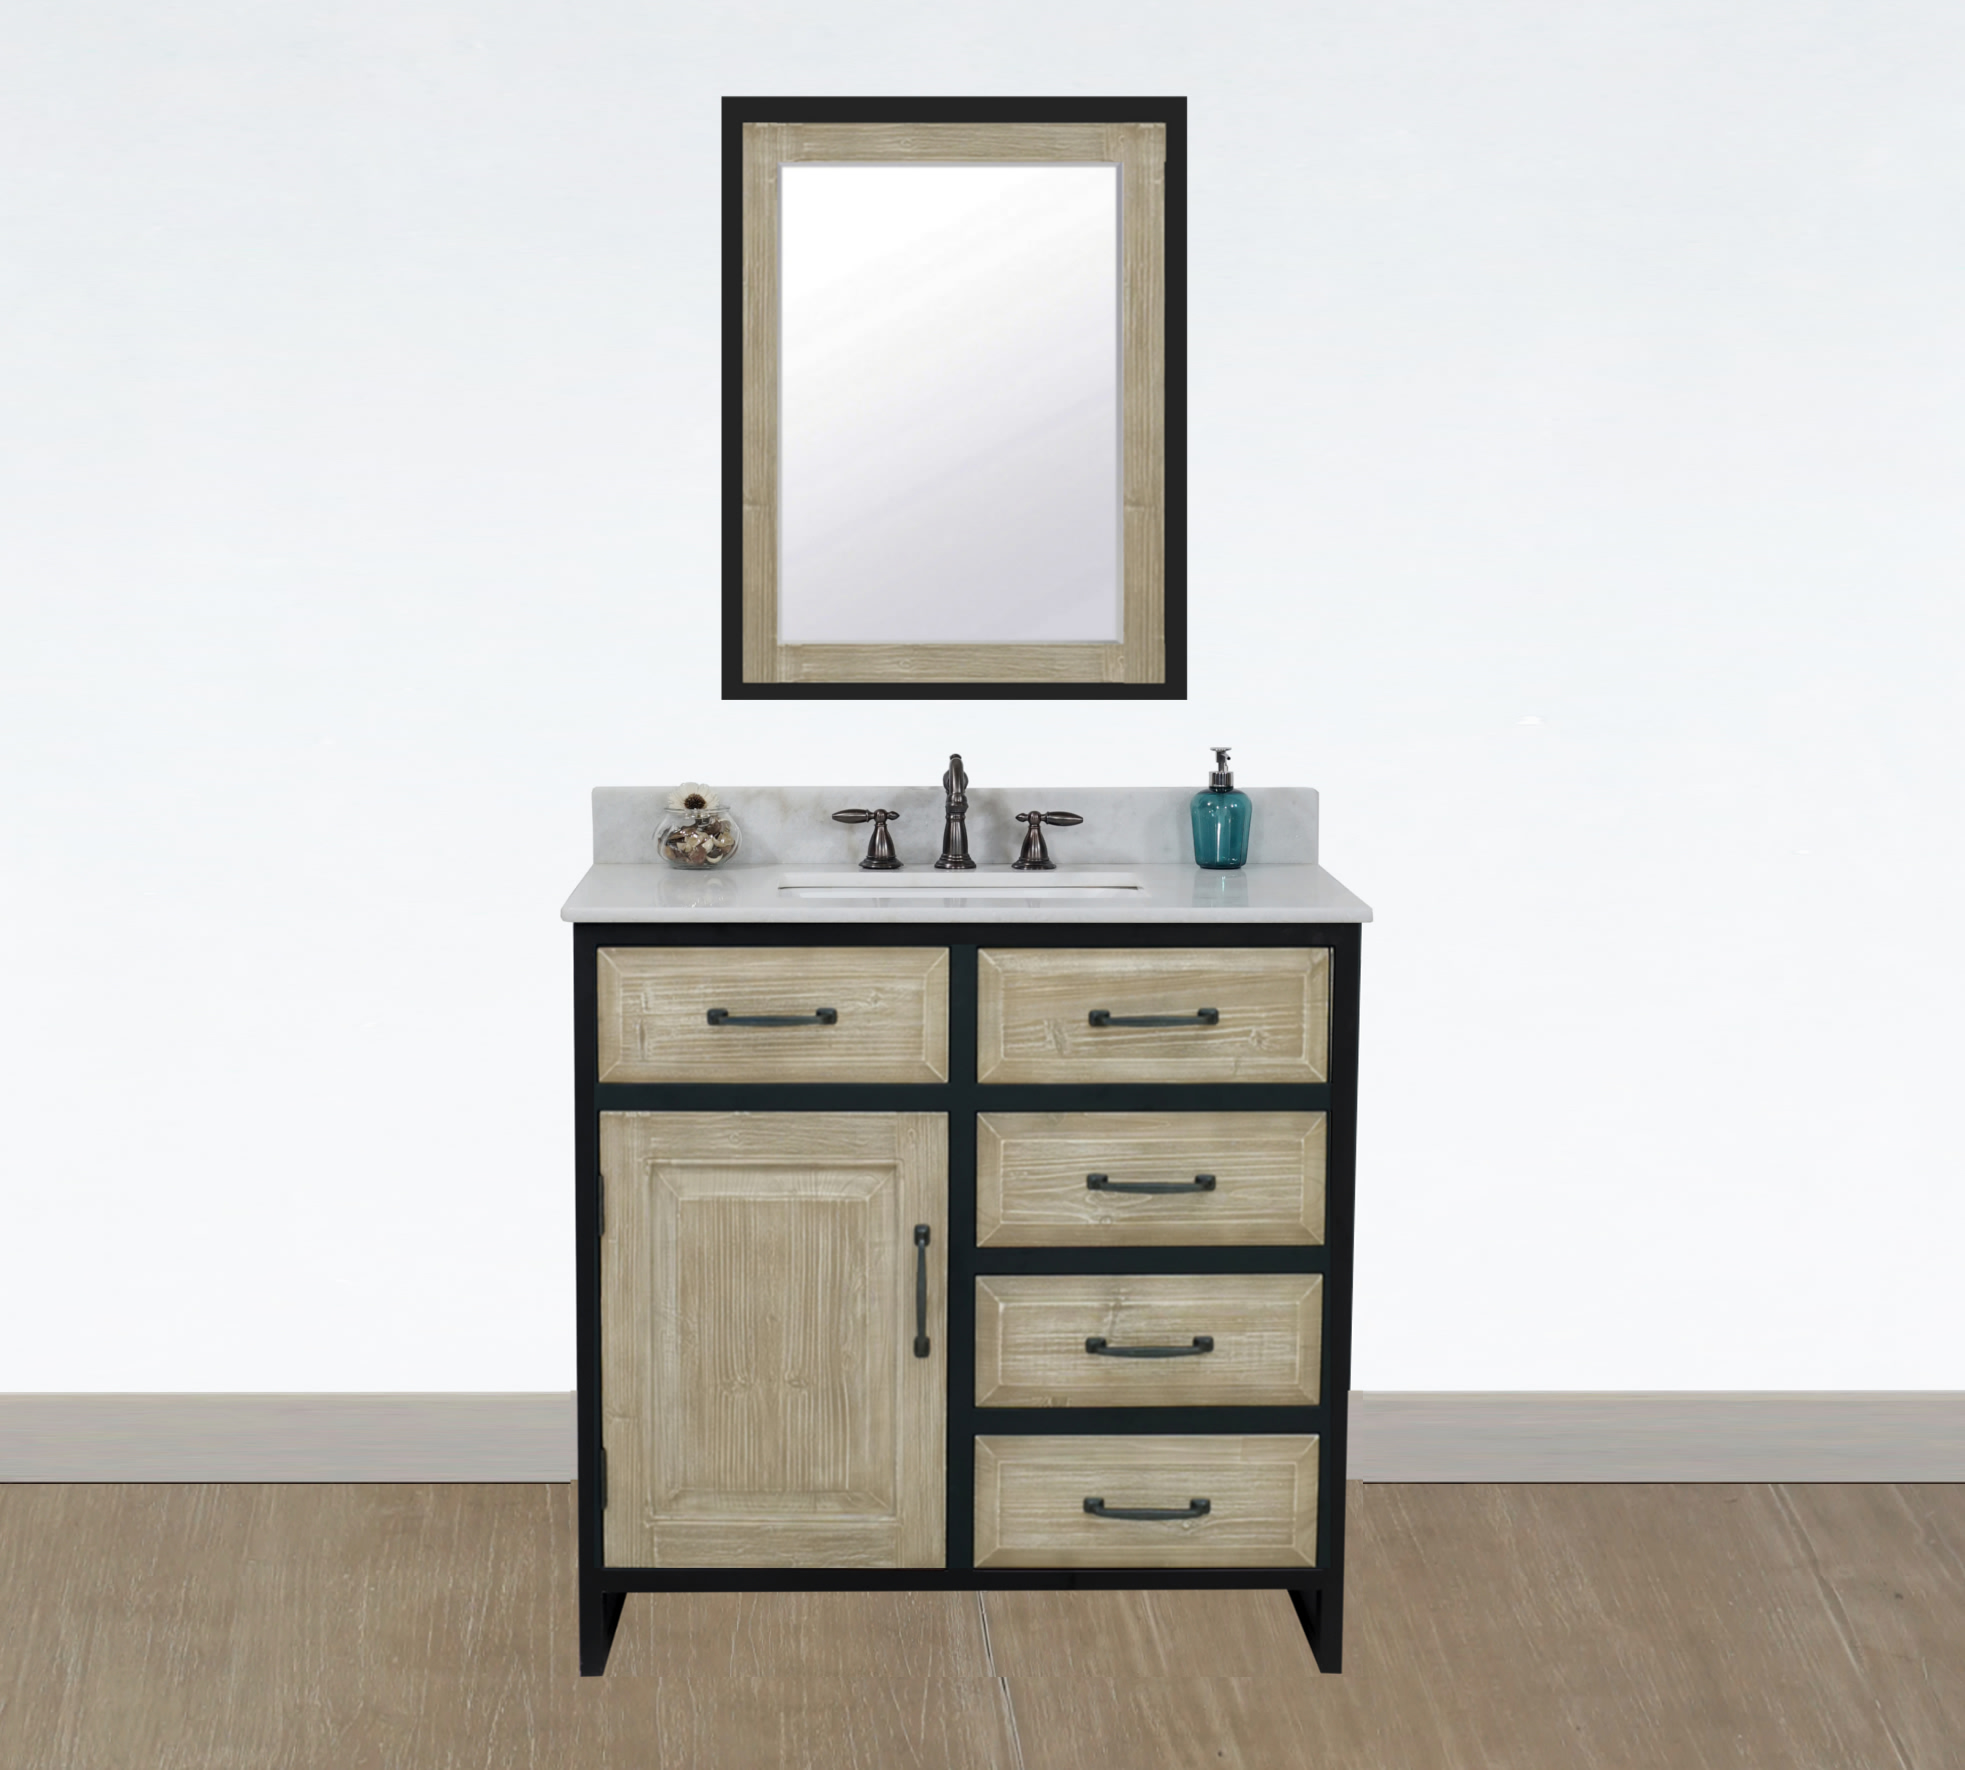 36" Rustic Solid Fir Single Sink with Iron Frame Vanity - No Faucet with Countertop Options